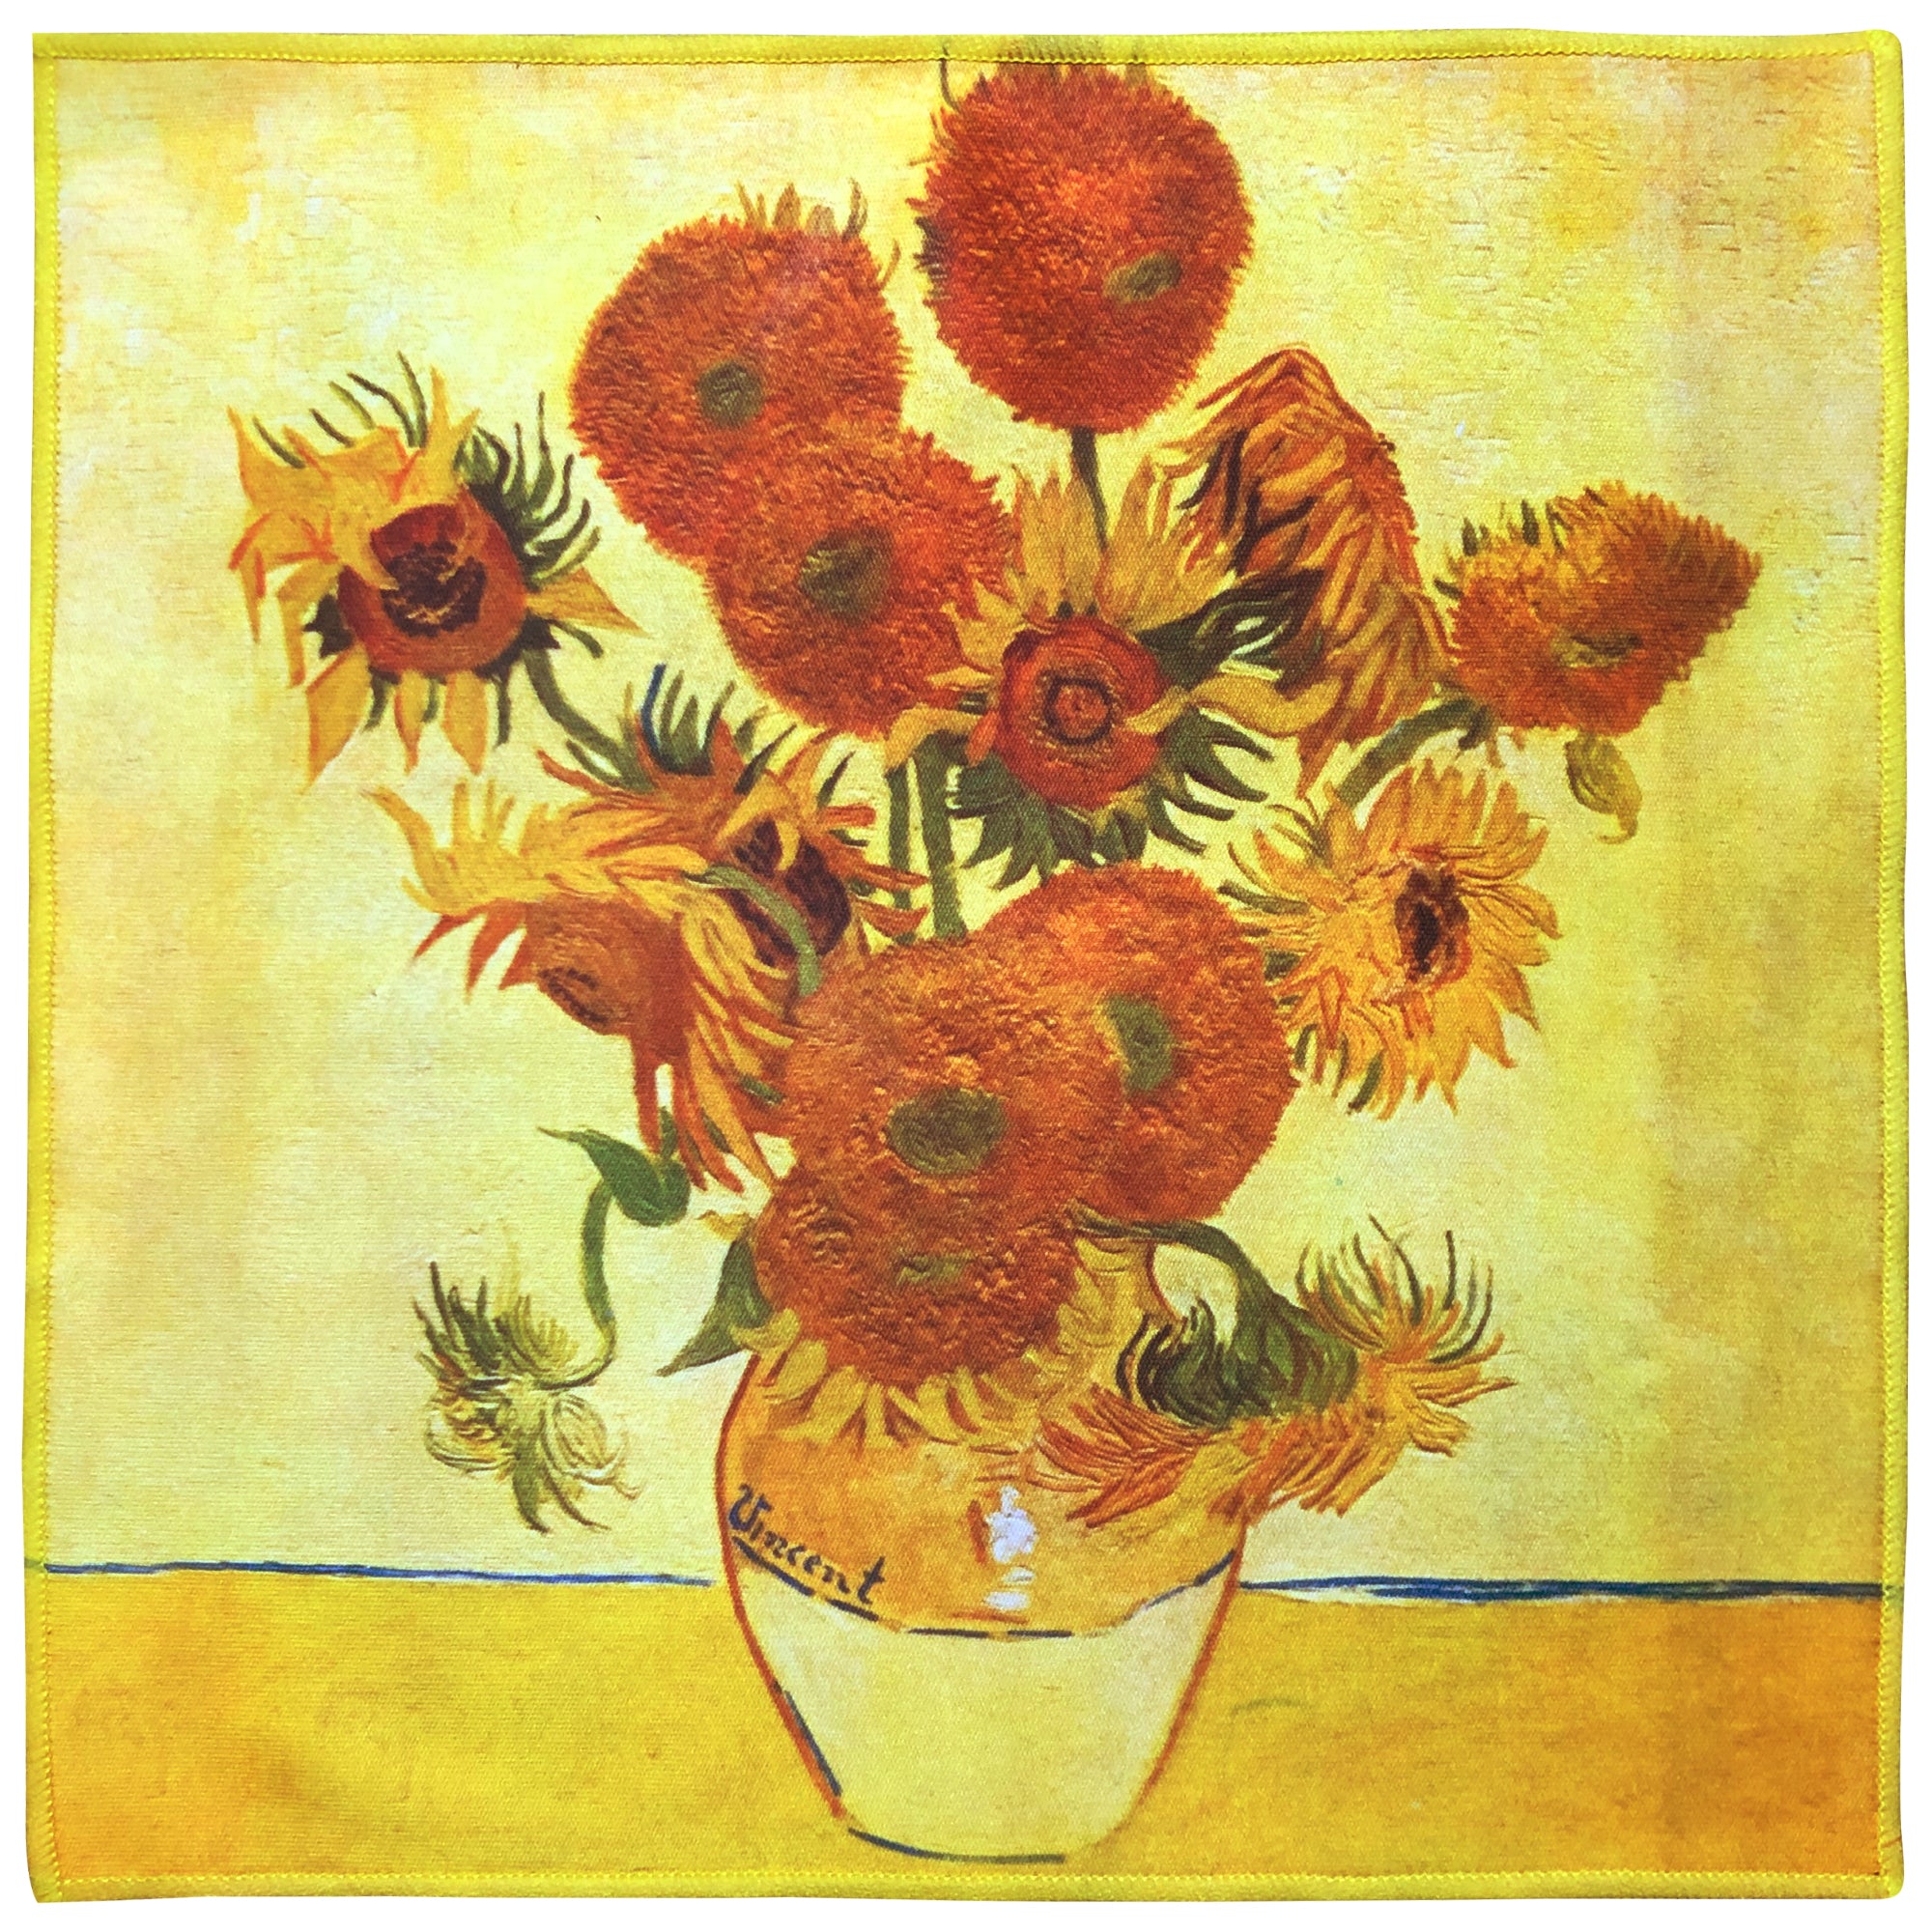 [6 Pack] Vincent Van Gogh "Sunflowers" - Art Collection - Ultra Premium Quality Microfiber Cleaning Cloths